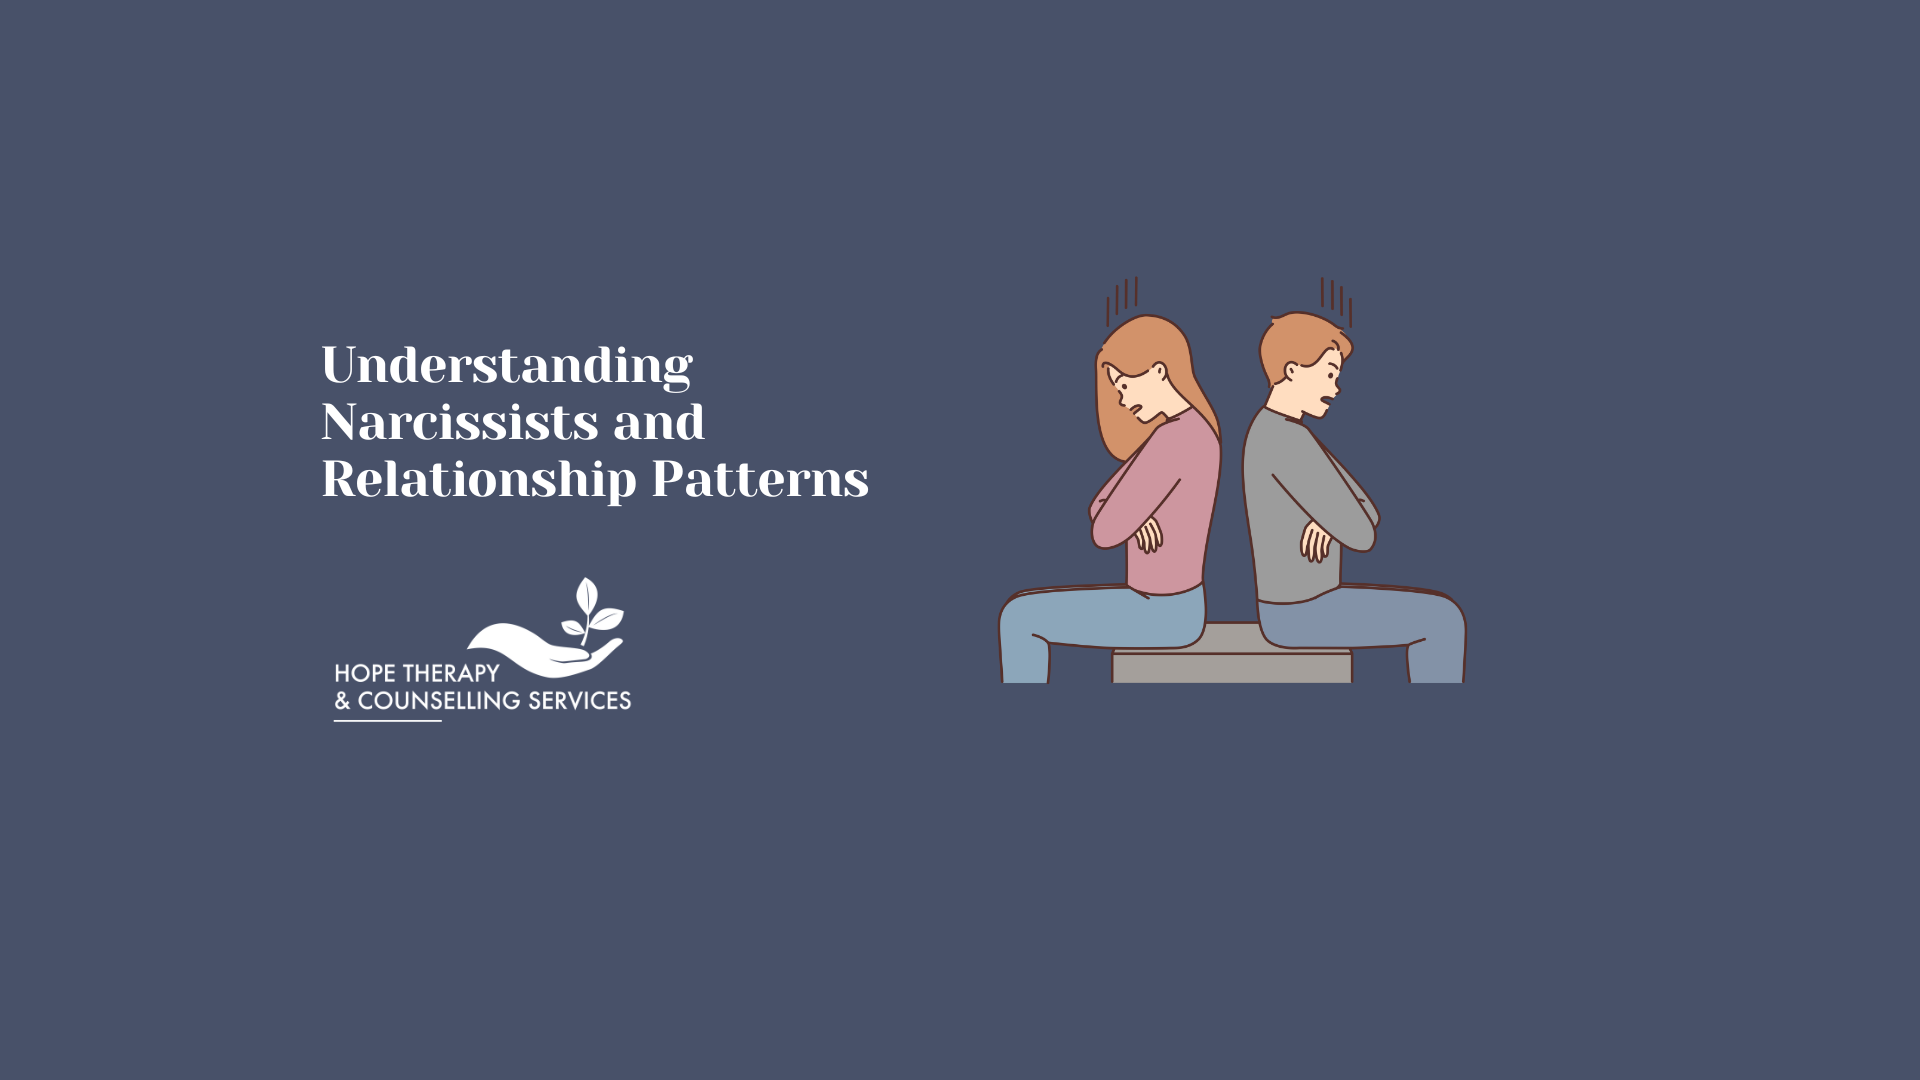 Narcissists and Relationship Patterns